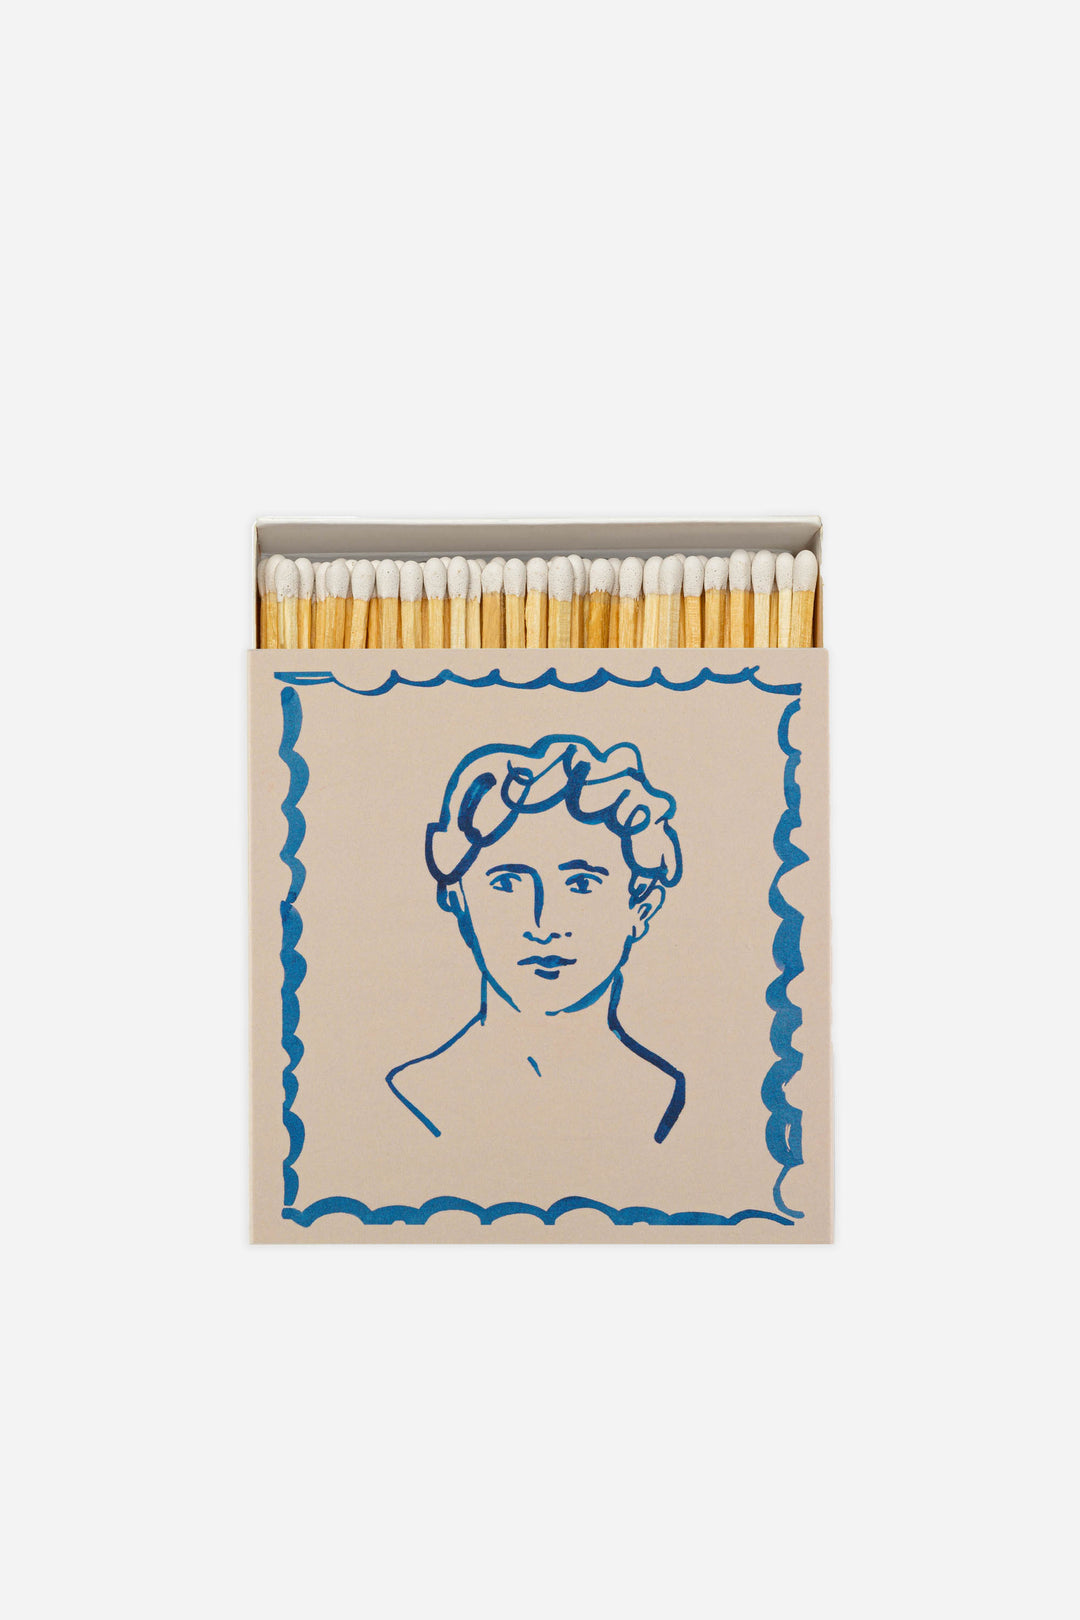 Matches / Handsome by Wanderlust Paper Co.